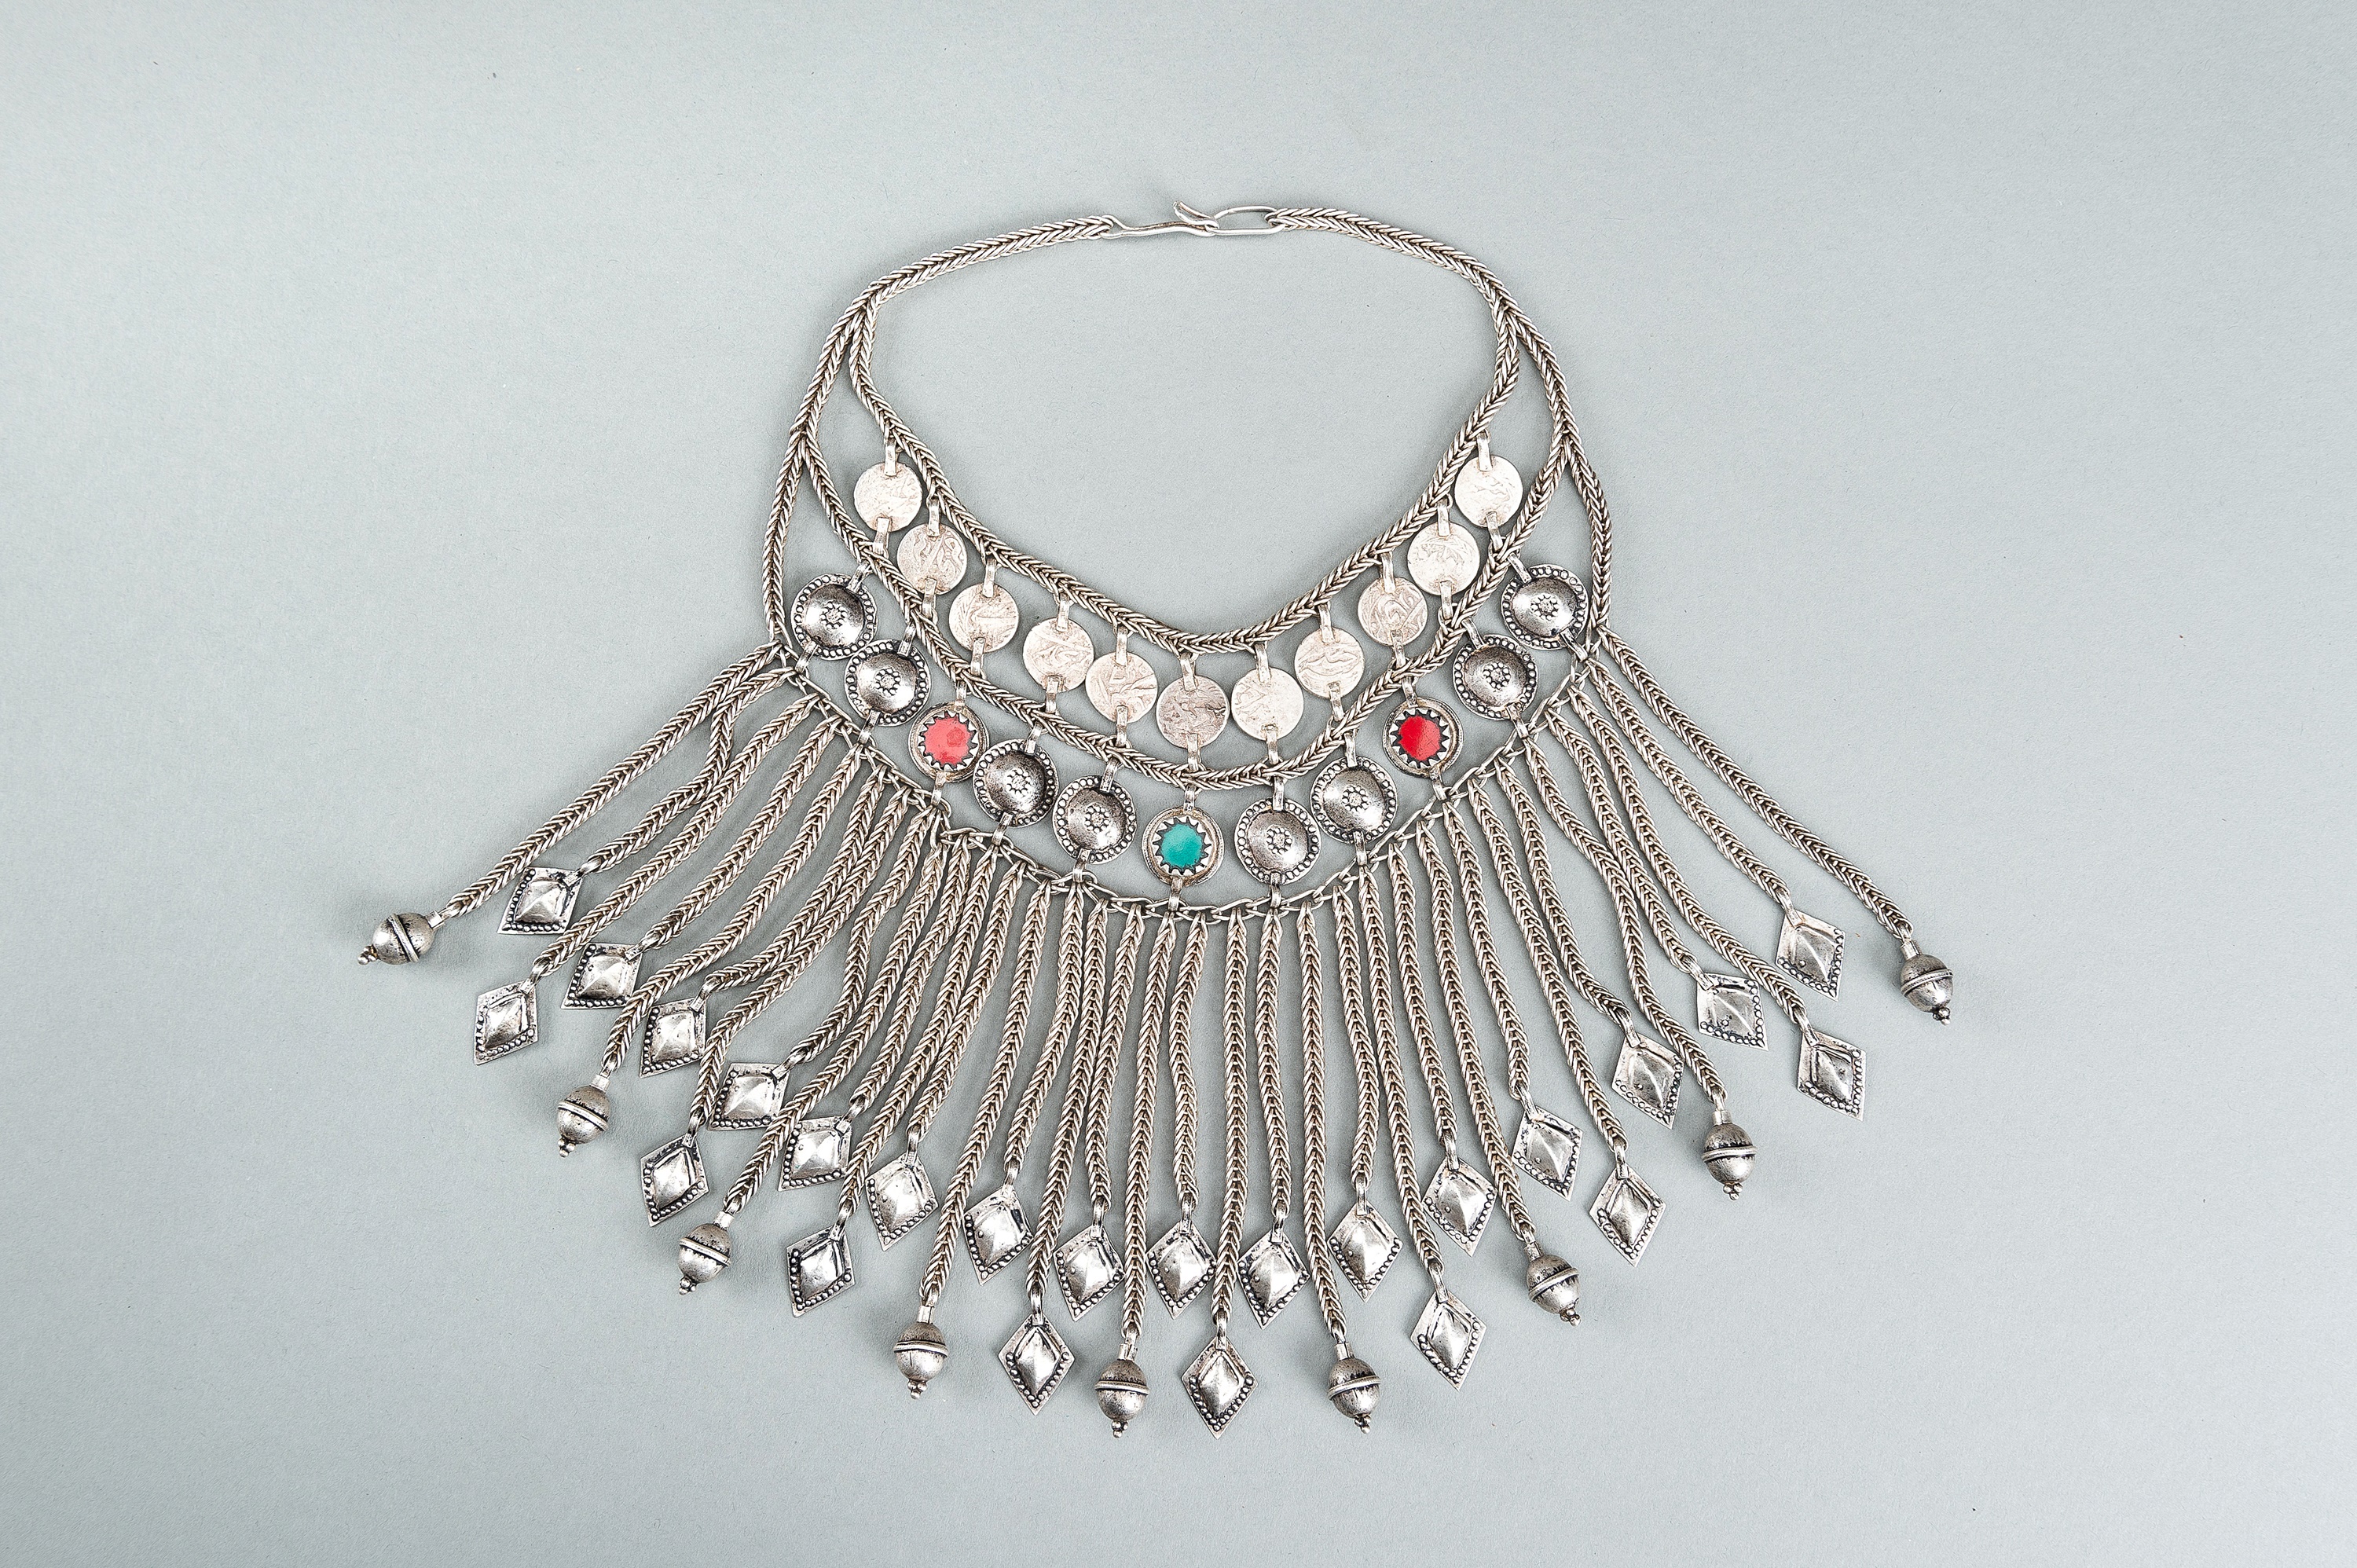 A TRIBAL AFGHAN MULTI-STRAND SILVER NECKLACE WITH GLASS INSETS, c. 1950s - Image 2 of 13